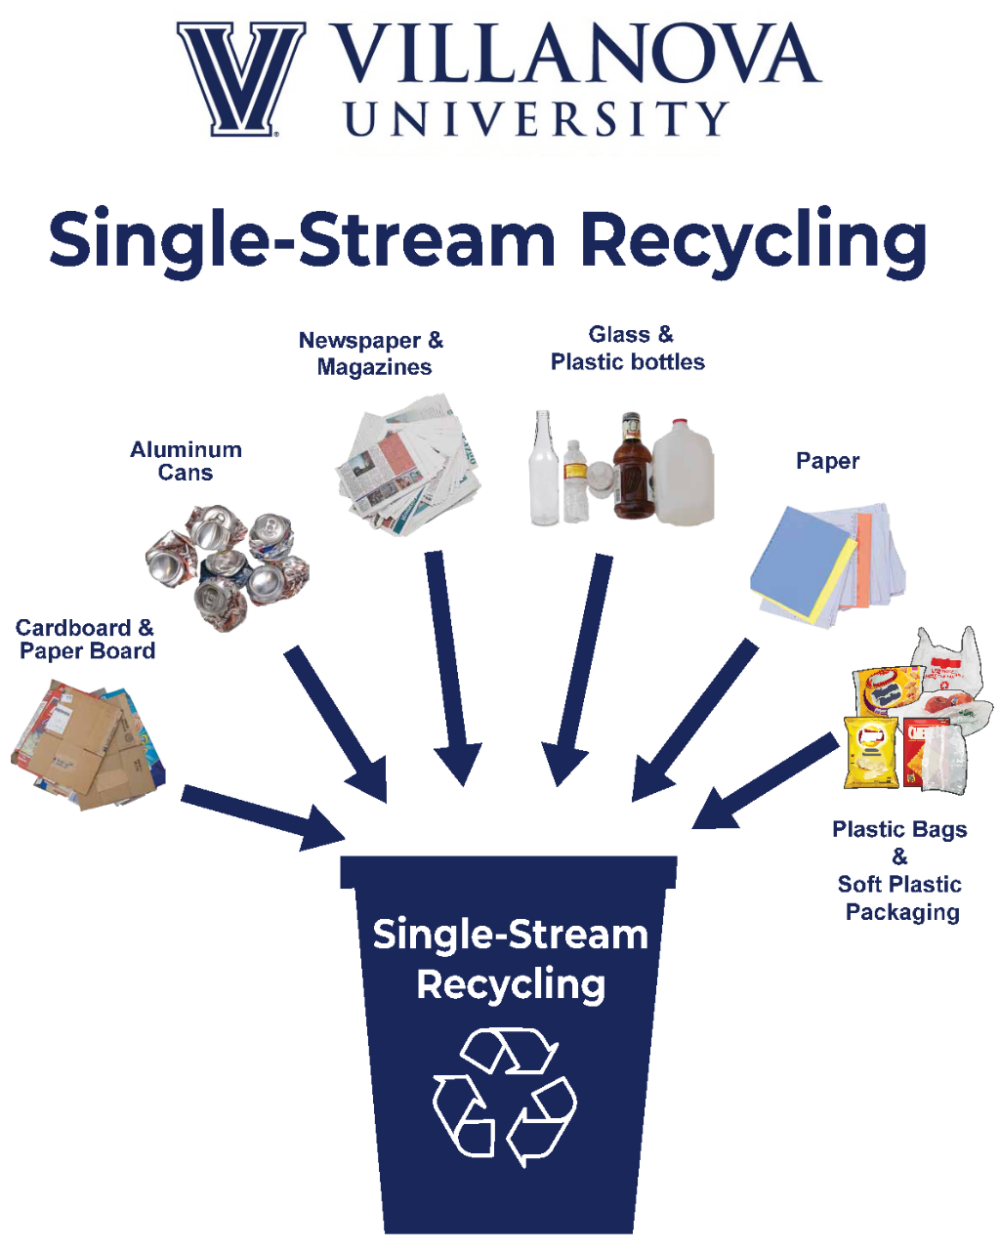 Common Recyclable Items: Paper, Plastic Containers (#1-#7), Flexible Plastics, Newspaper, Magazines, Aluminum or Steel Cans, Books (if hardcovers are removed), Glass Bottles, and Cardboard